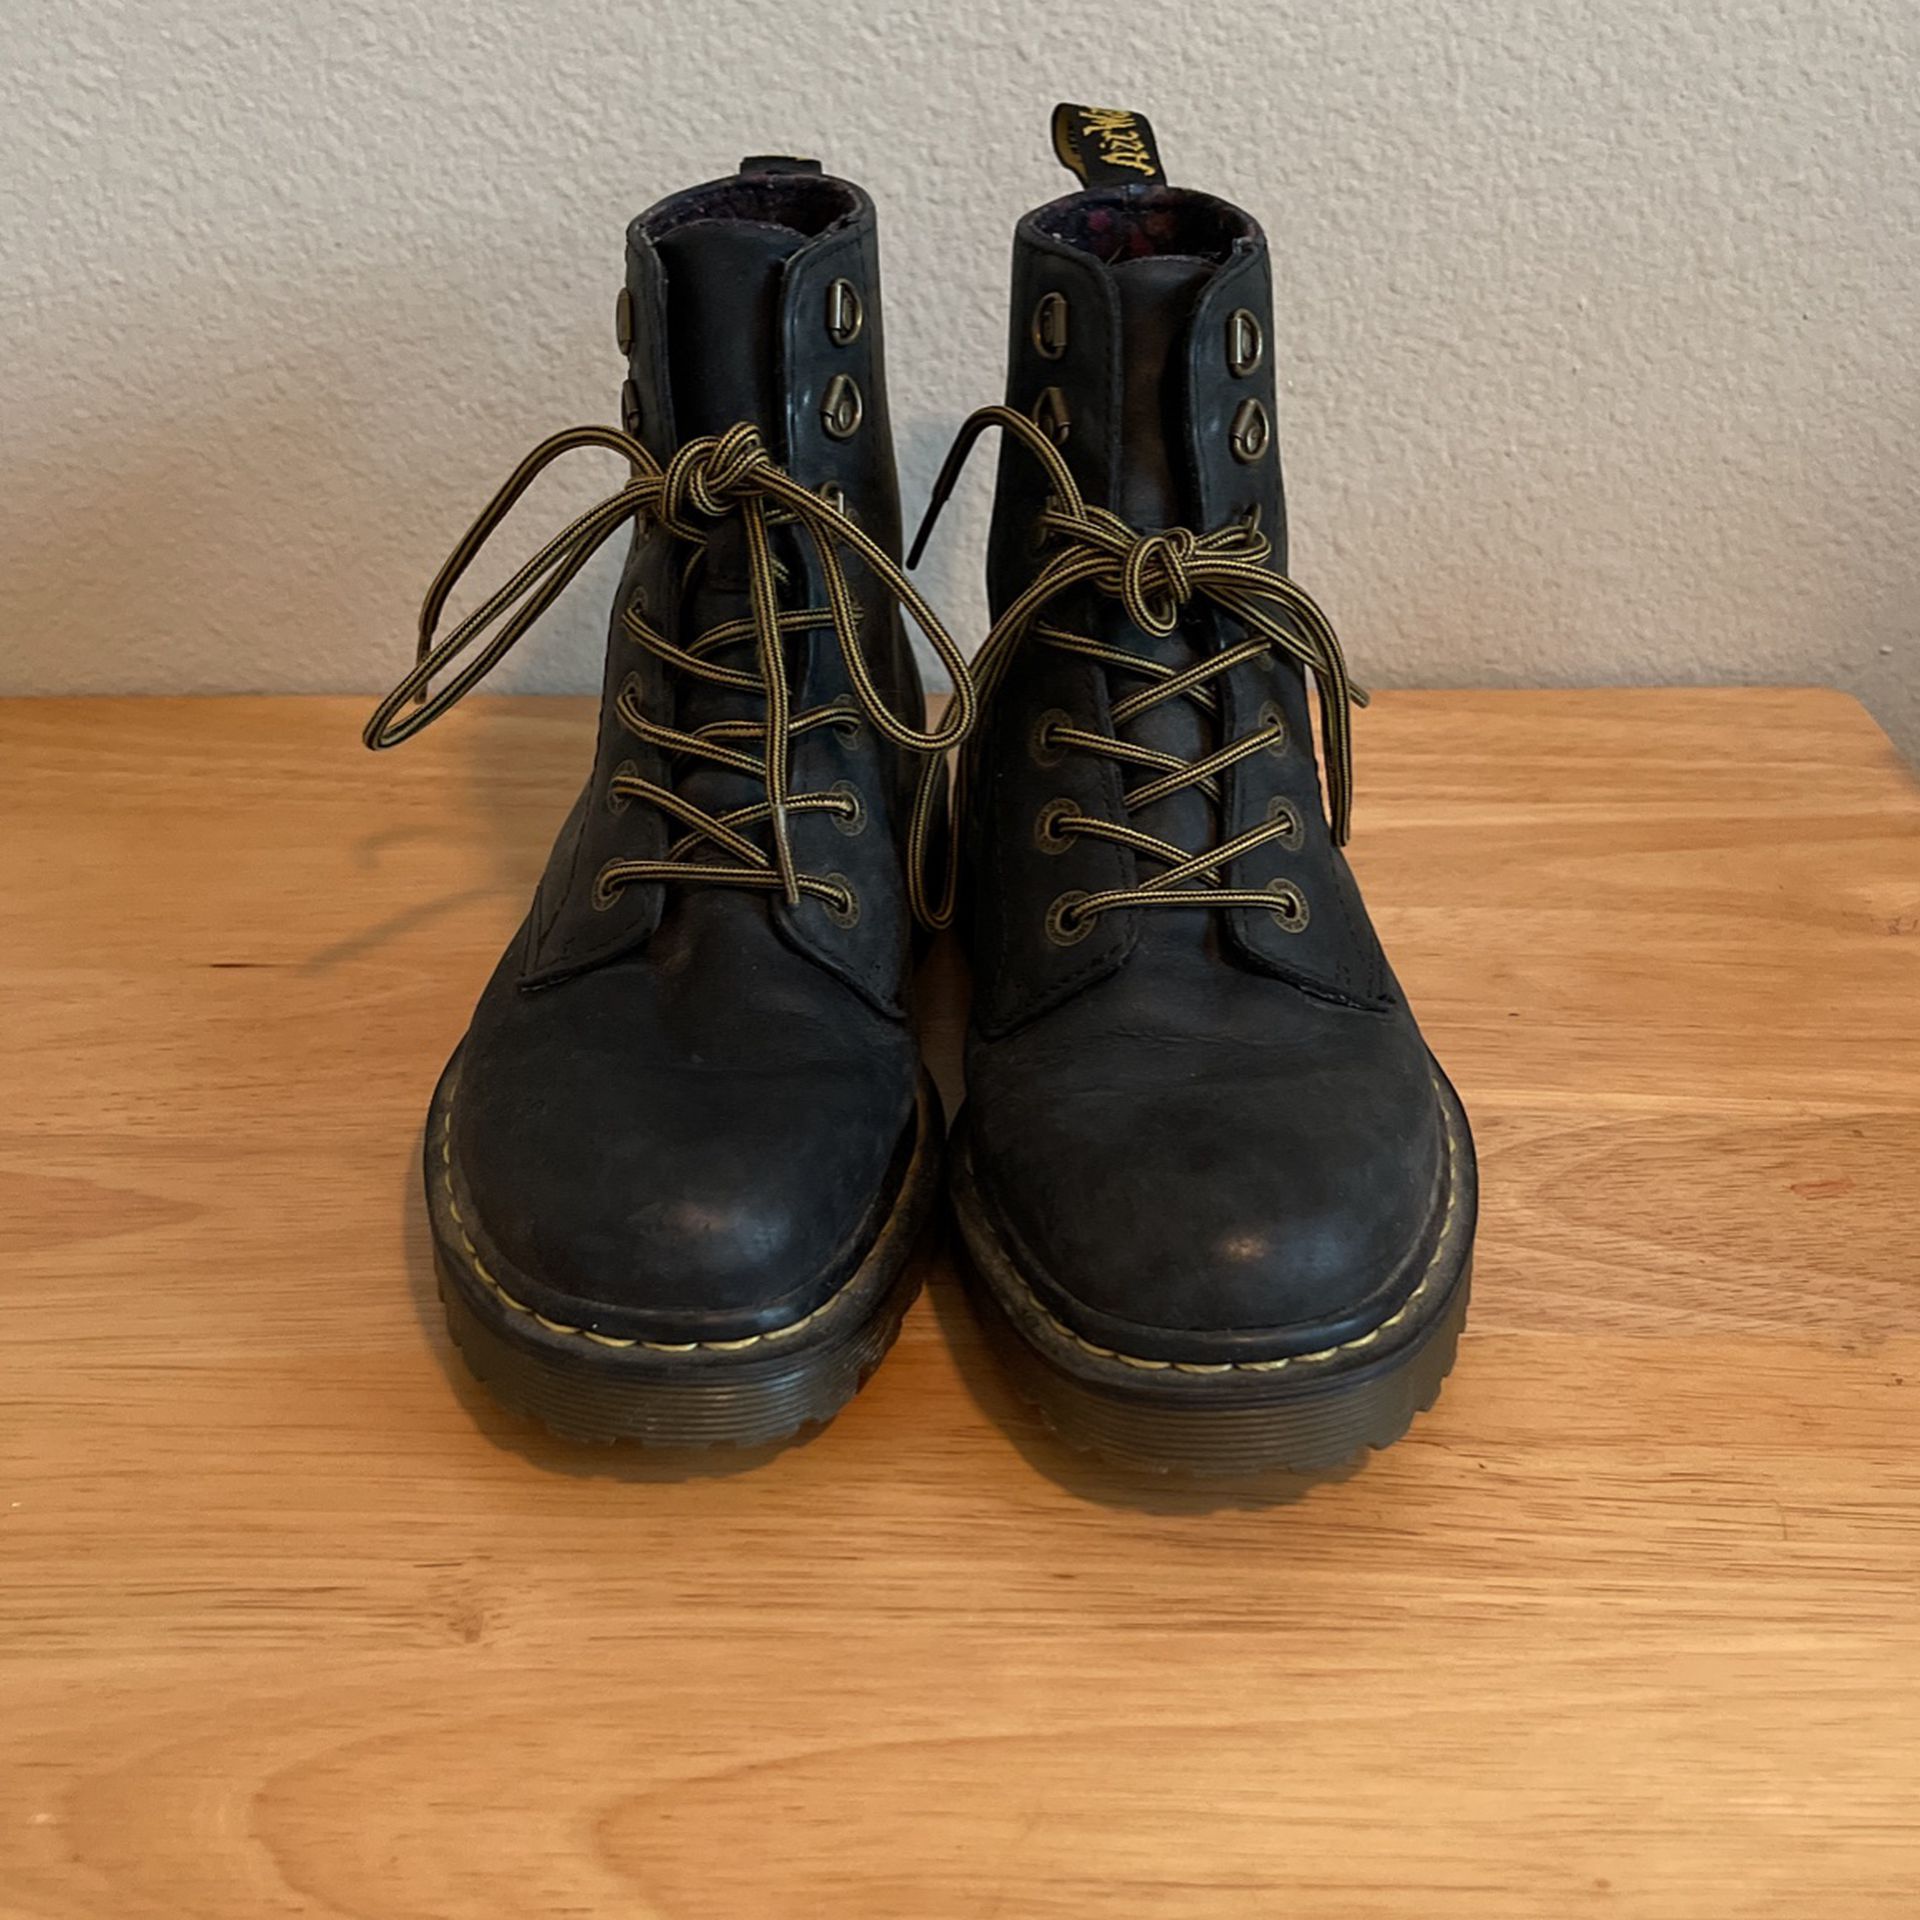 Dr. Martens Black Combat Boot With Floral Interior - Size 8